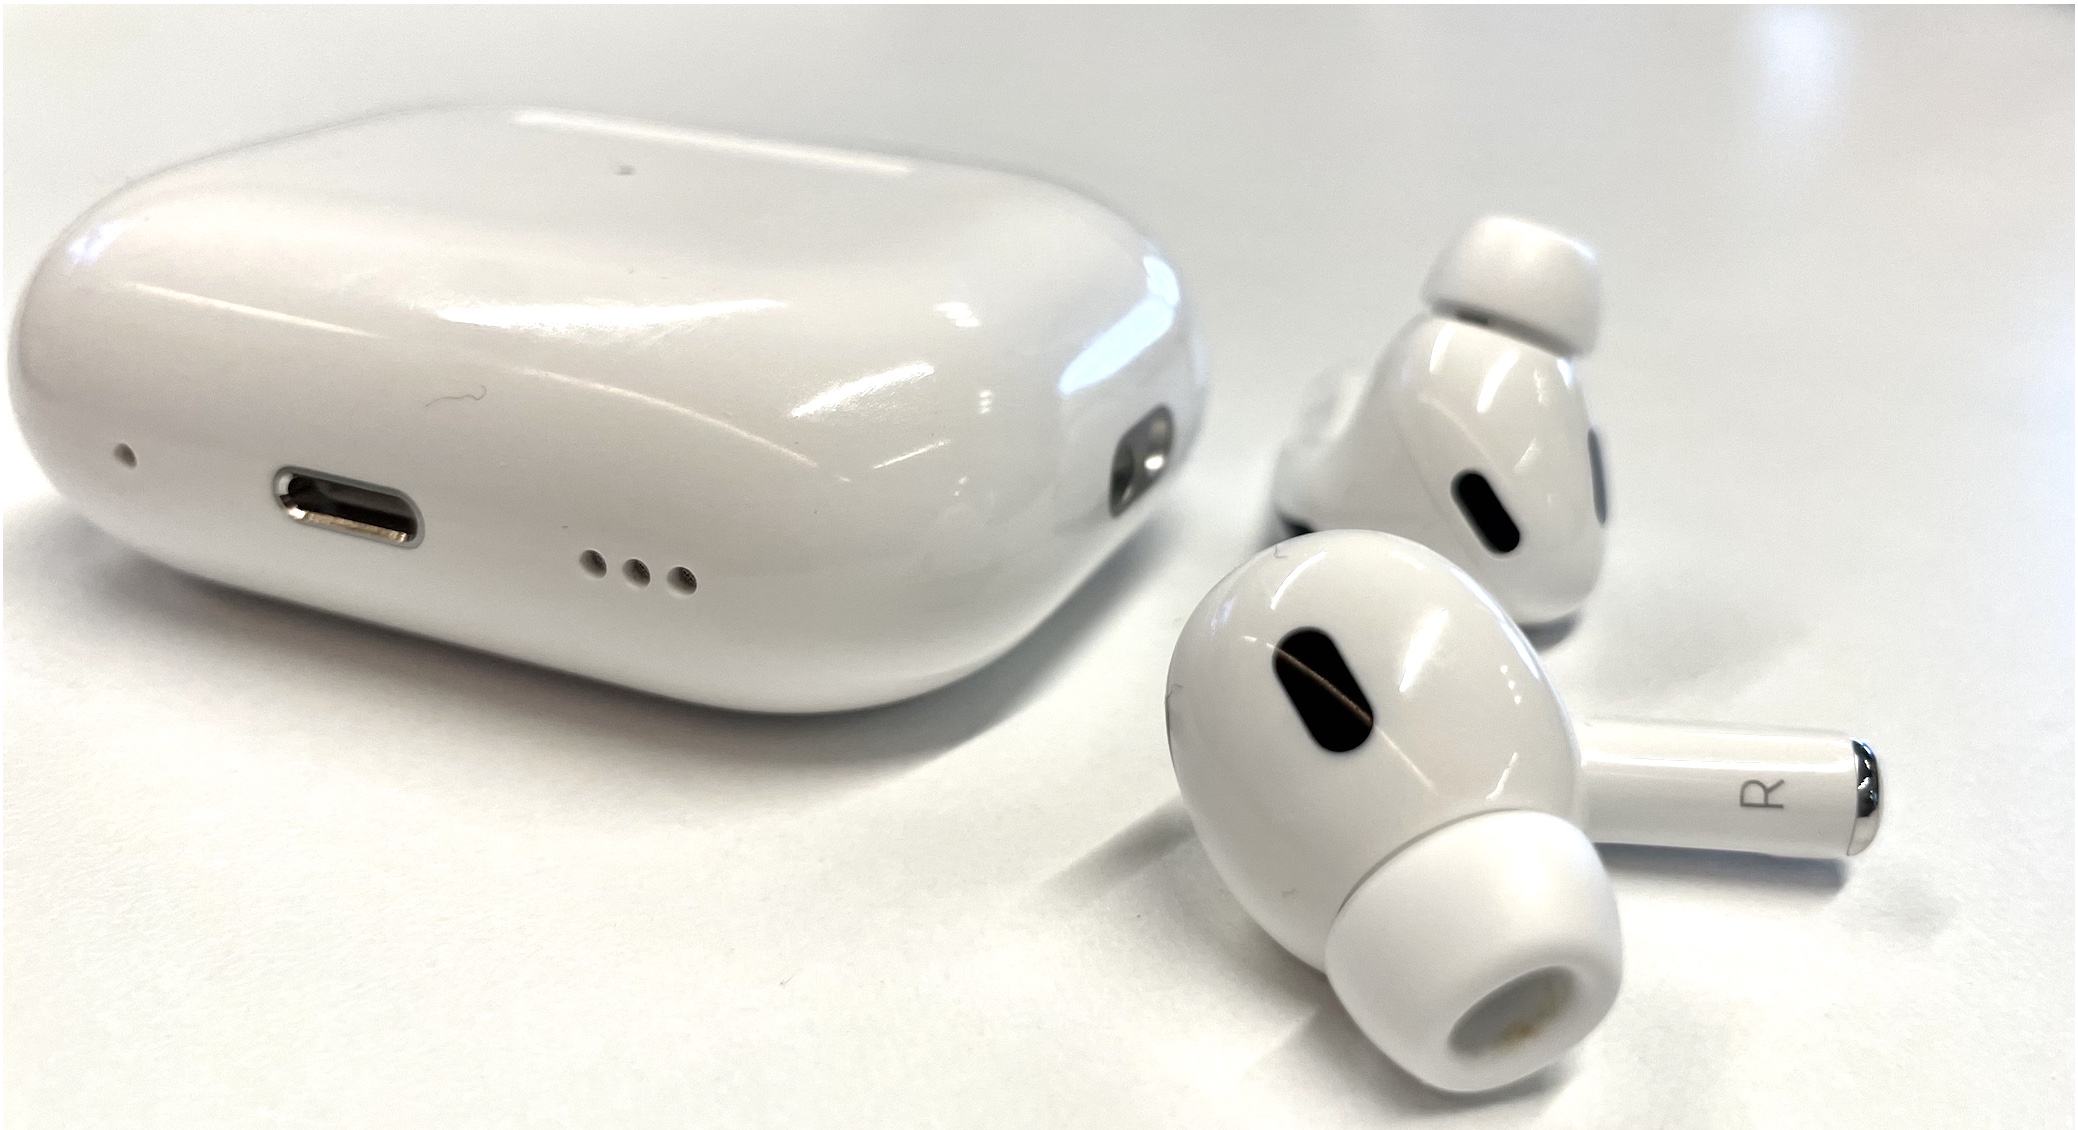 AirPods Pro 2 offer two big upgrades but connectivity chaos hasn't